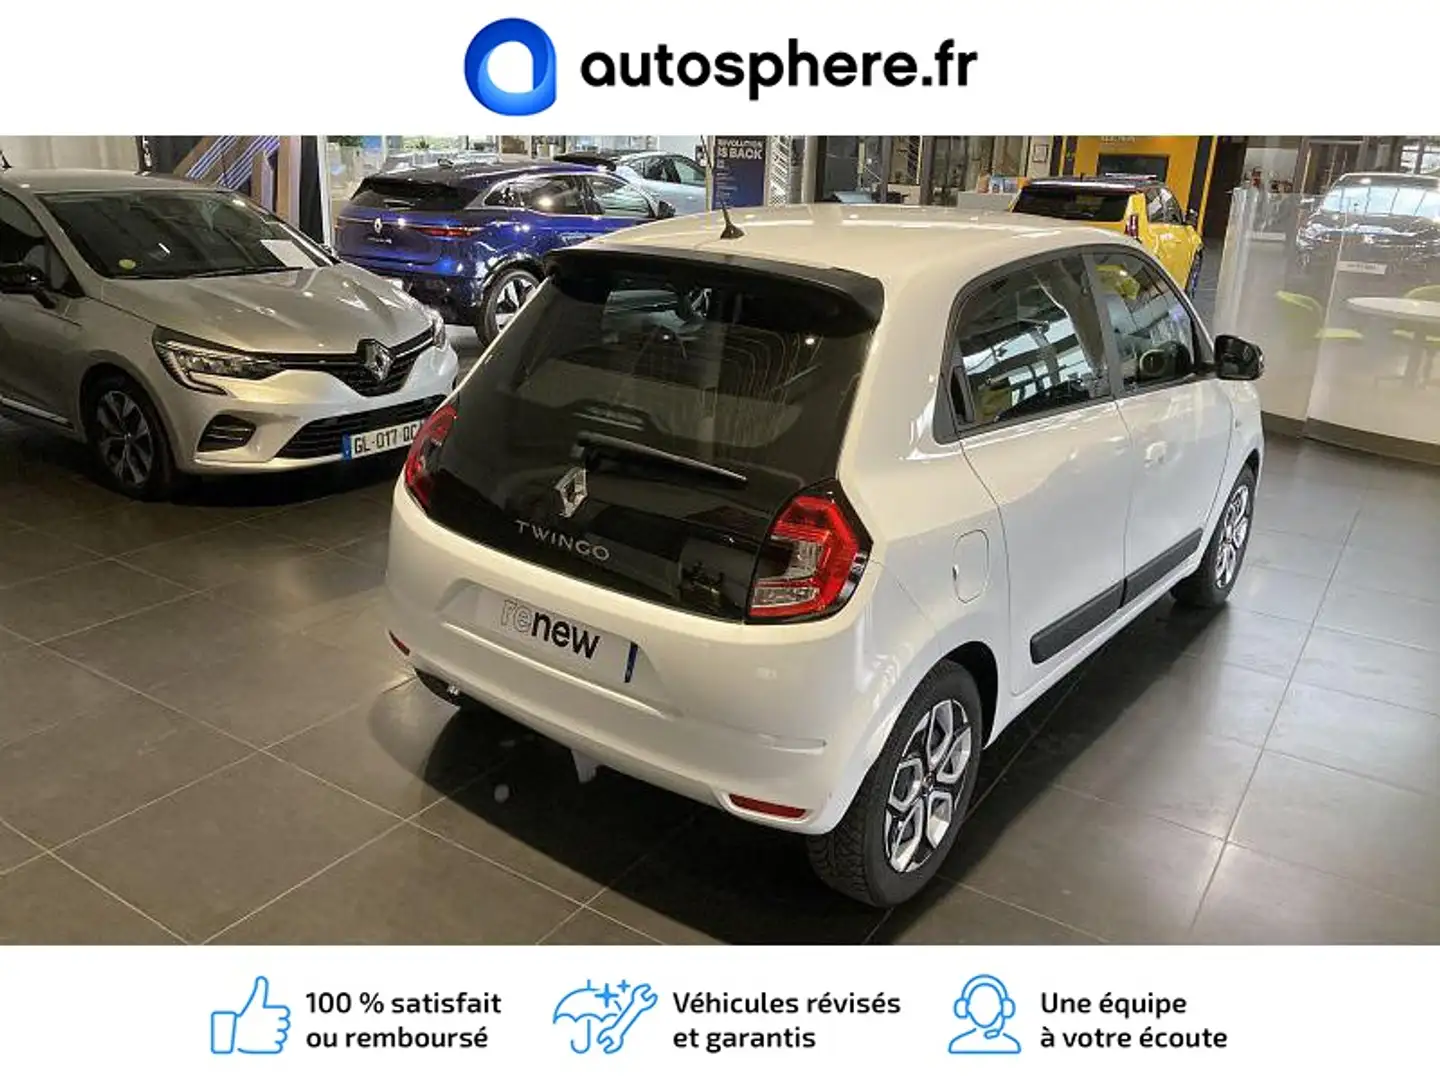 Renault Twingo 1.0 SCe 65ch Equilibre - 2